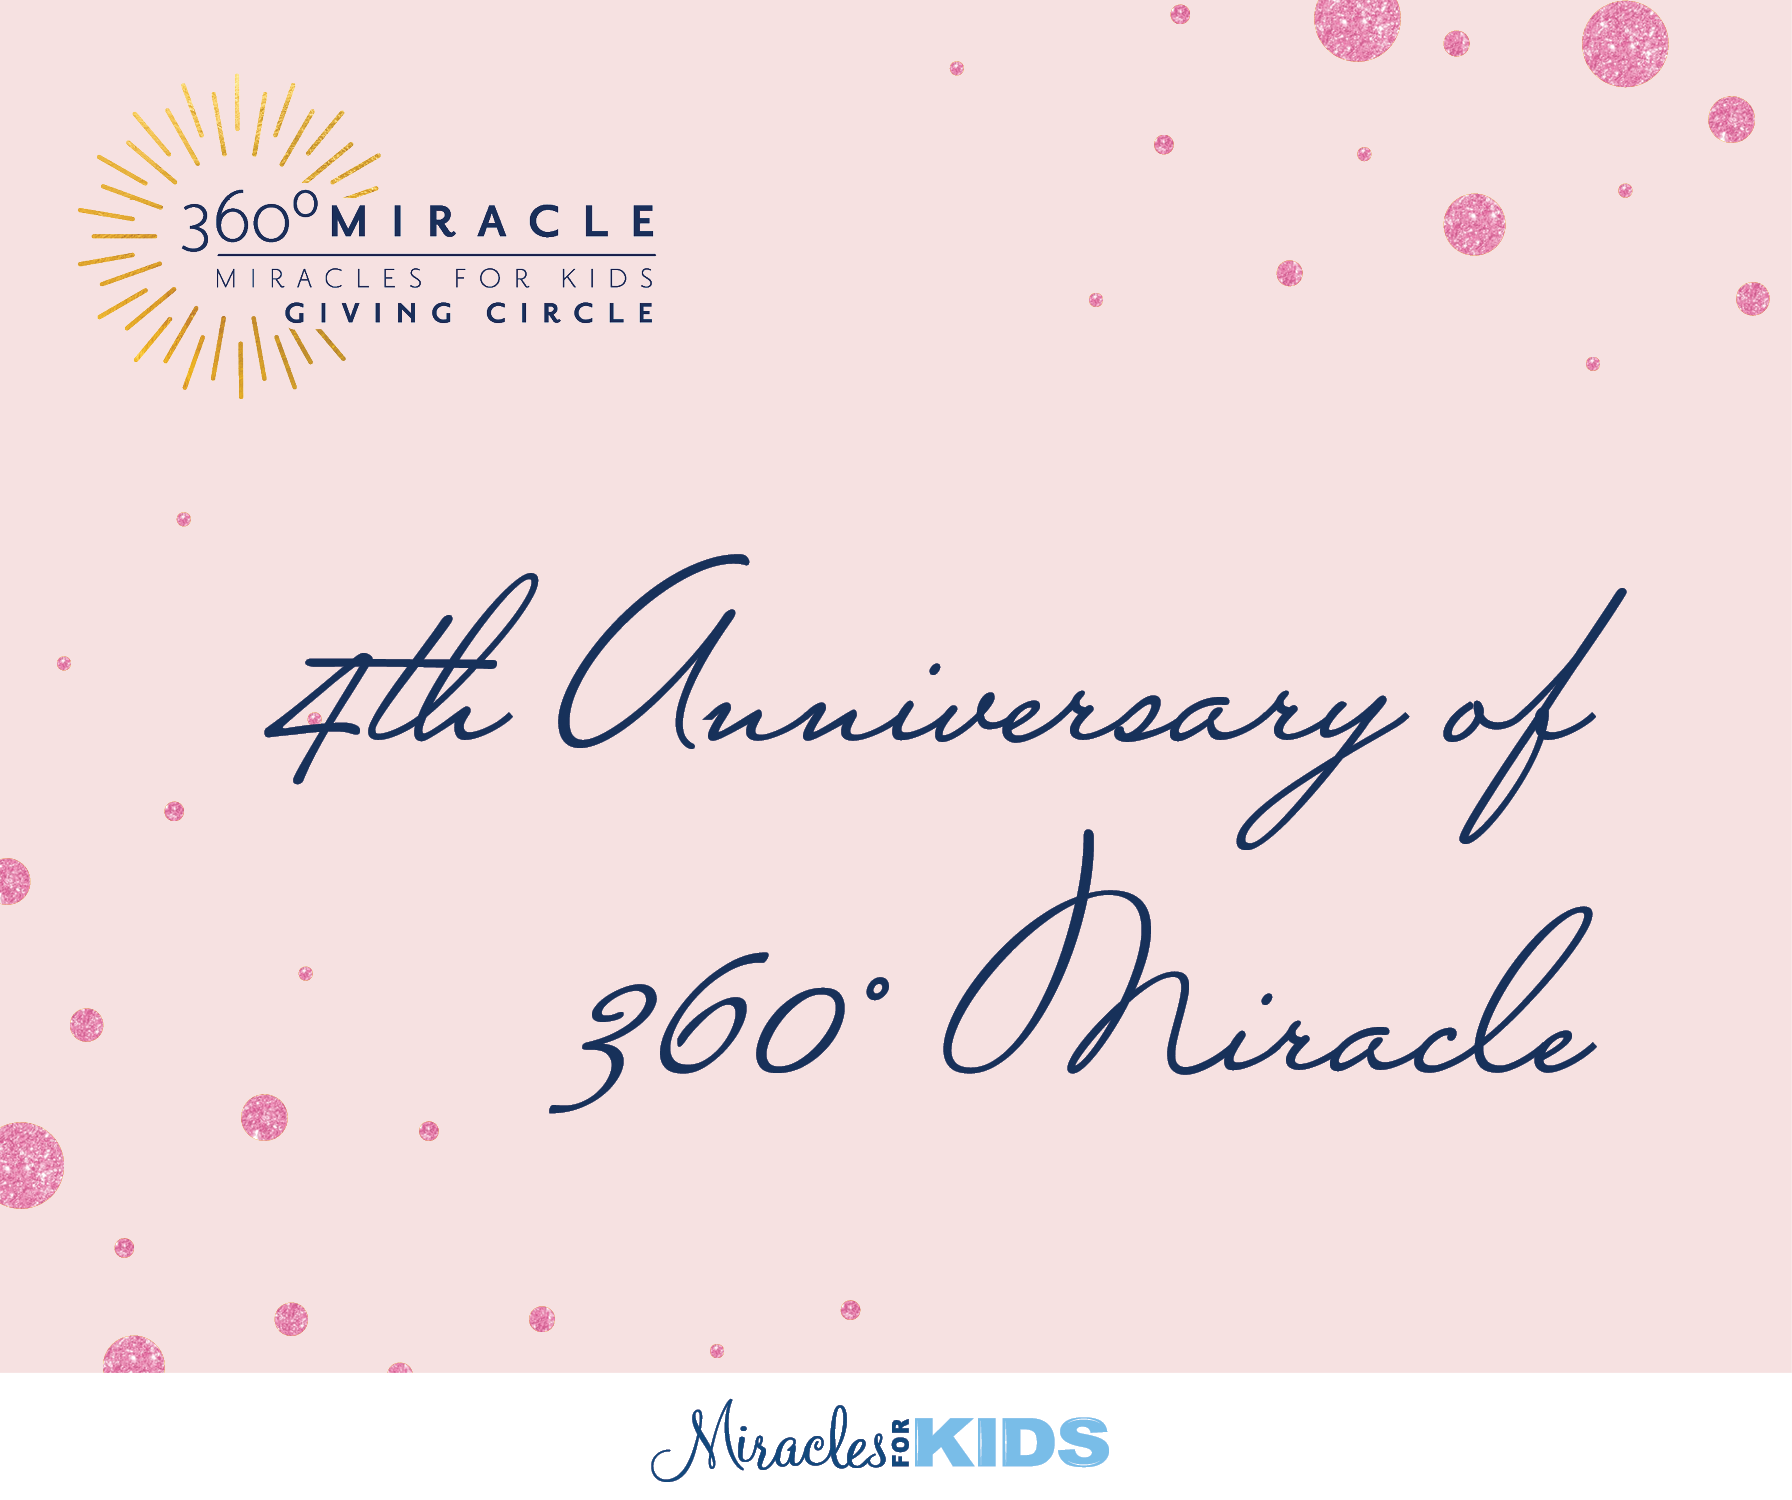 4th Anniversary of 360° Miracle